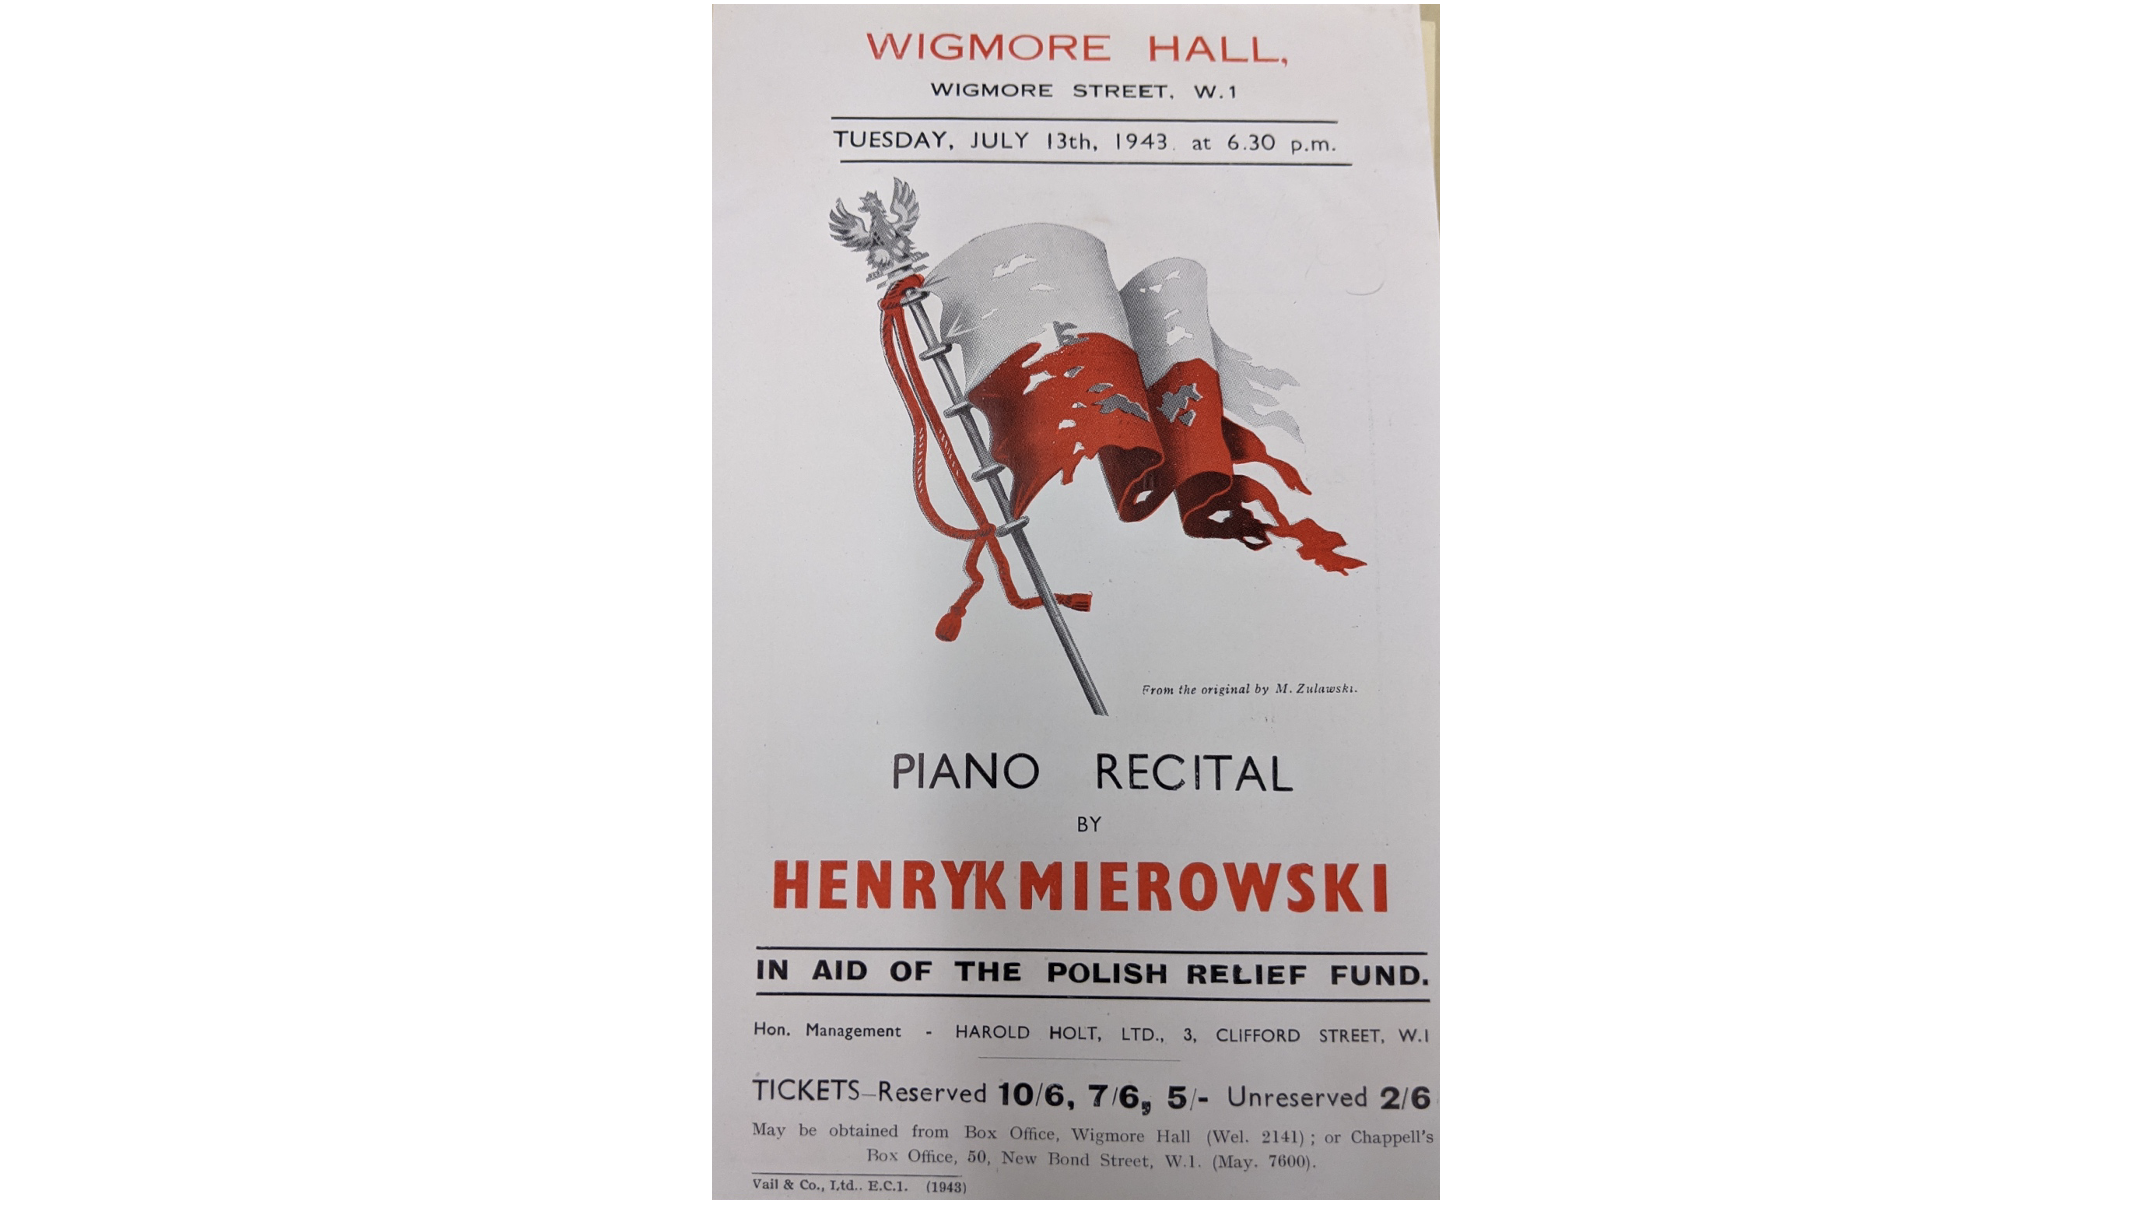 A flyer with the image of a torn polish flag at the top, advertising a piano recital by Henryk Mierowski, at Wigmore Hall on Tuesday, July 13th, 1943. The name of the pianist written in bold red font.